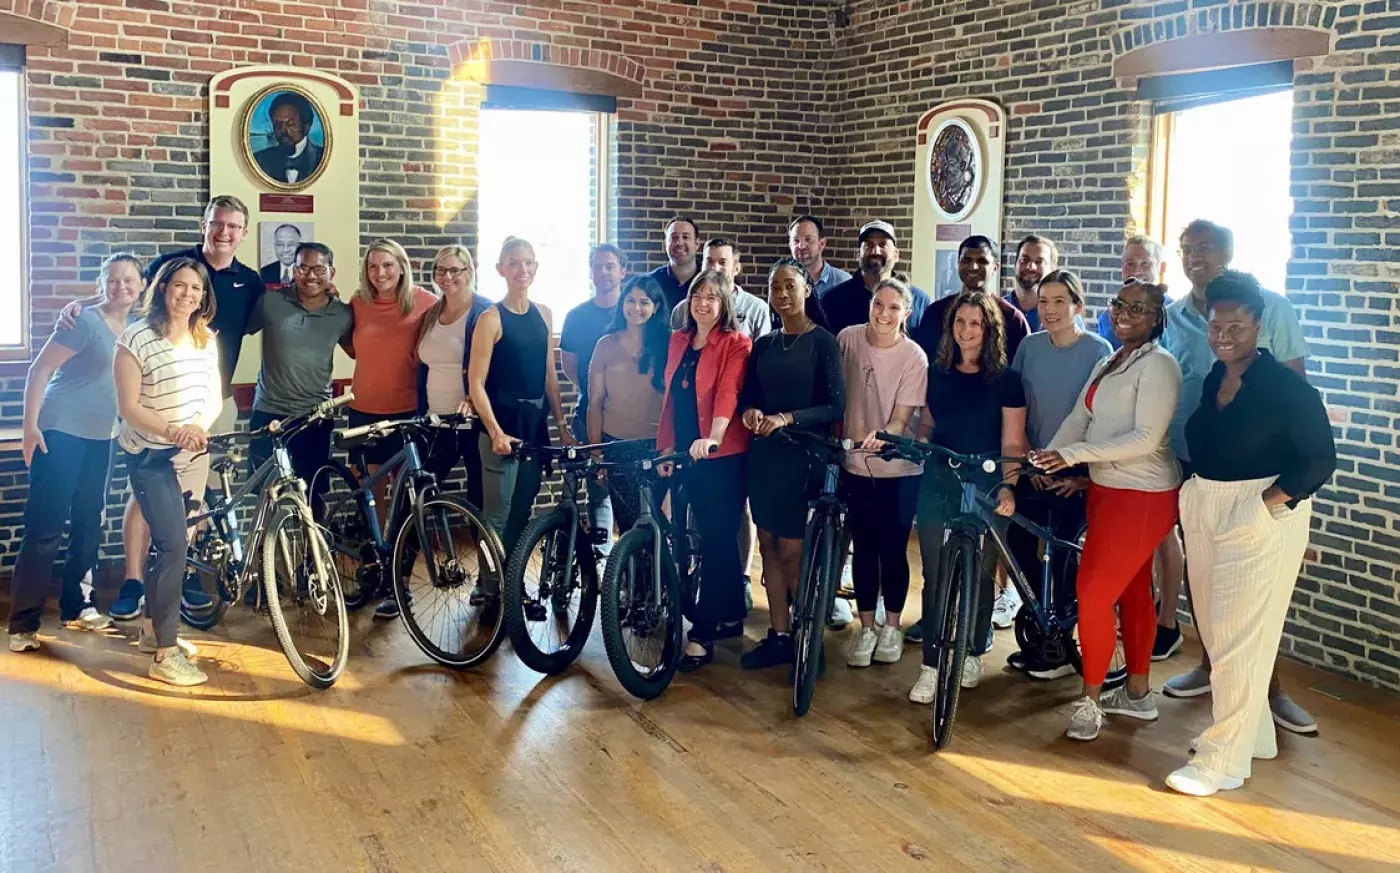 a group photo of 23 CIL residents with 6 bicycles in a brick walled and wood floor room.